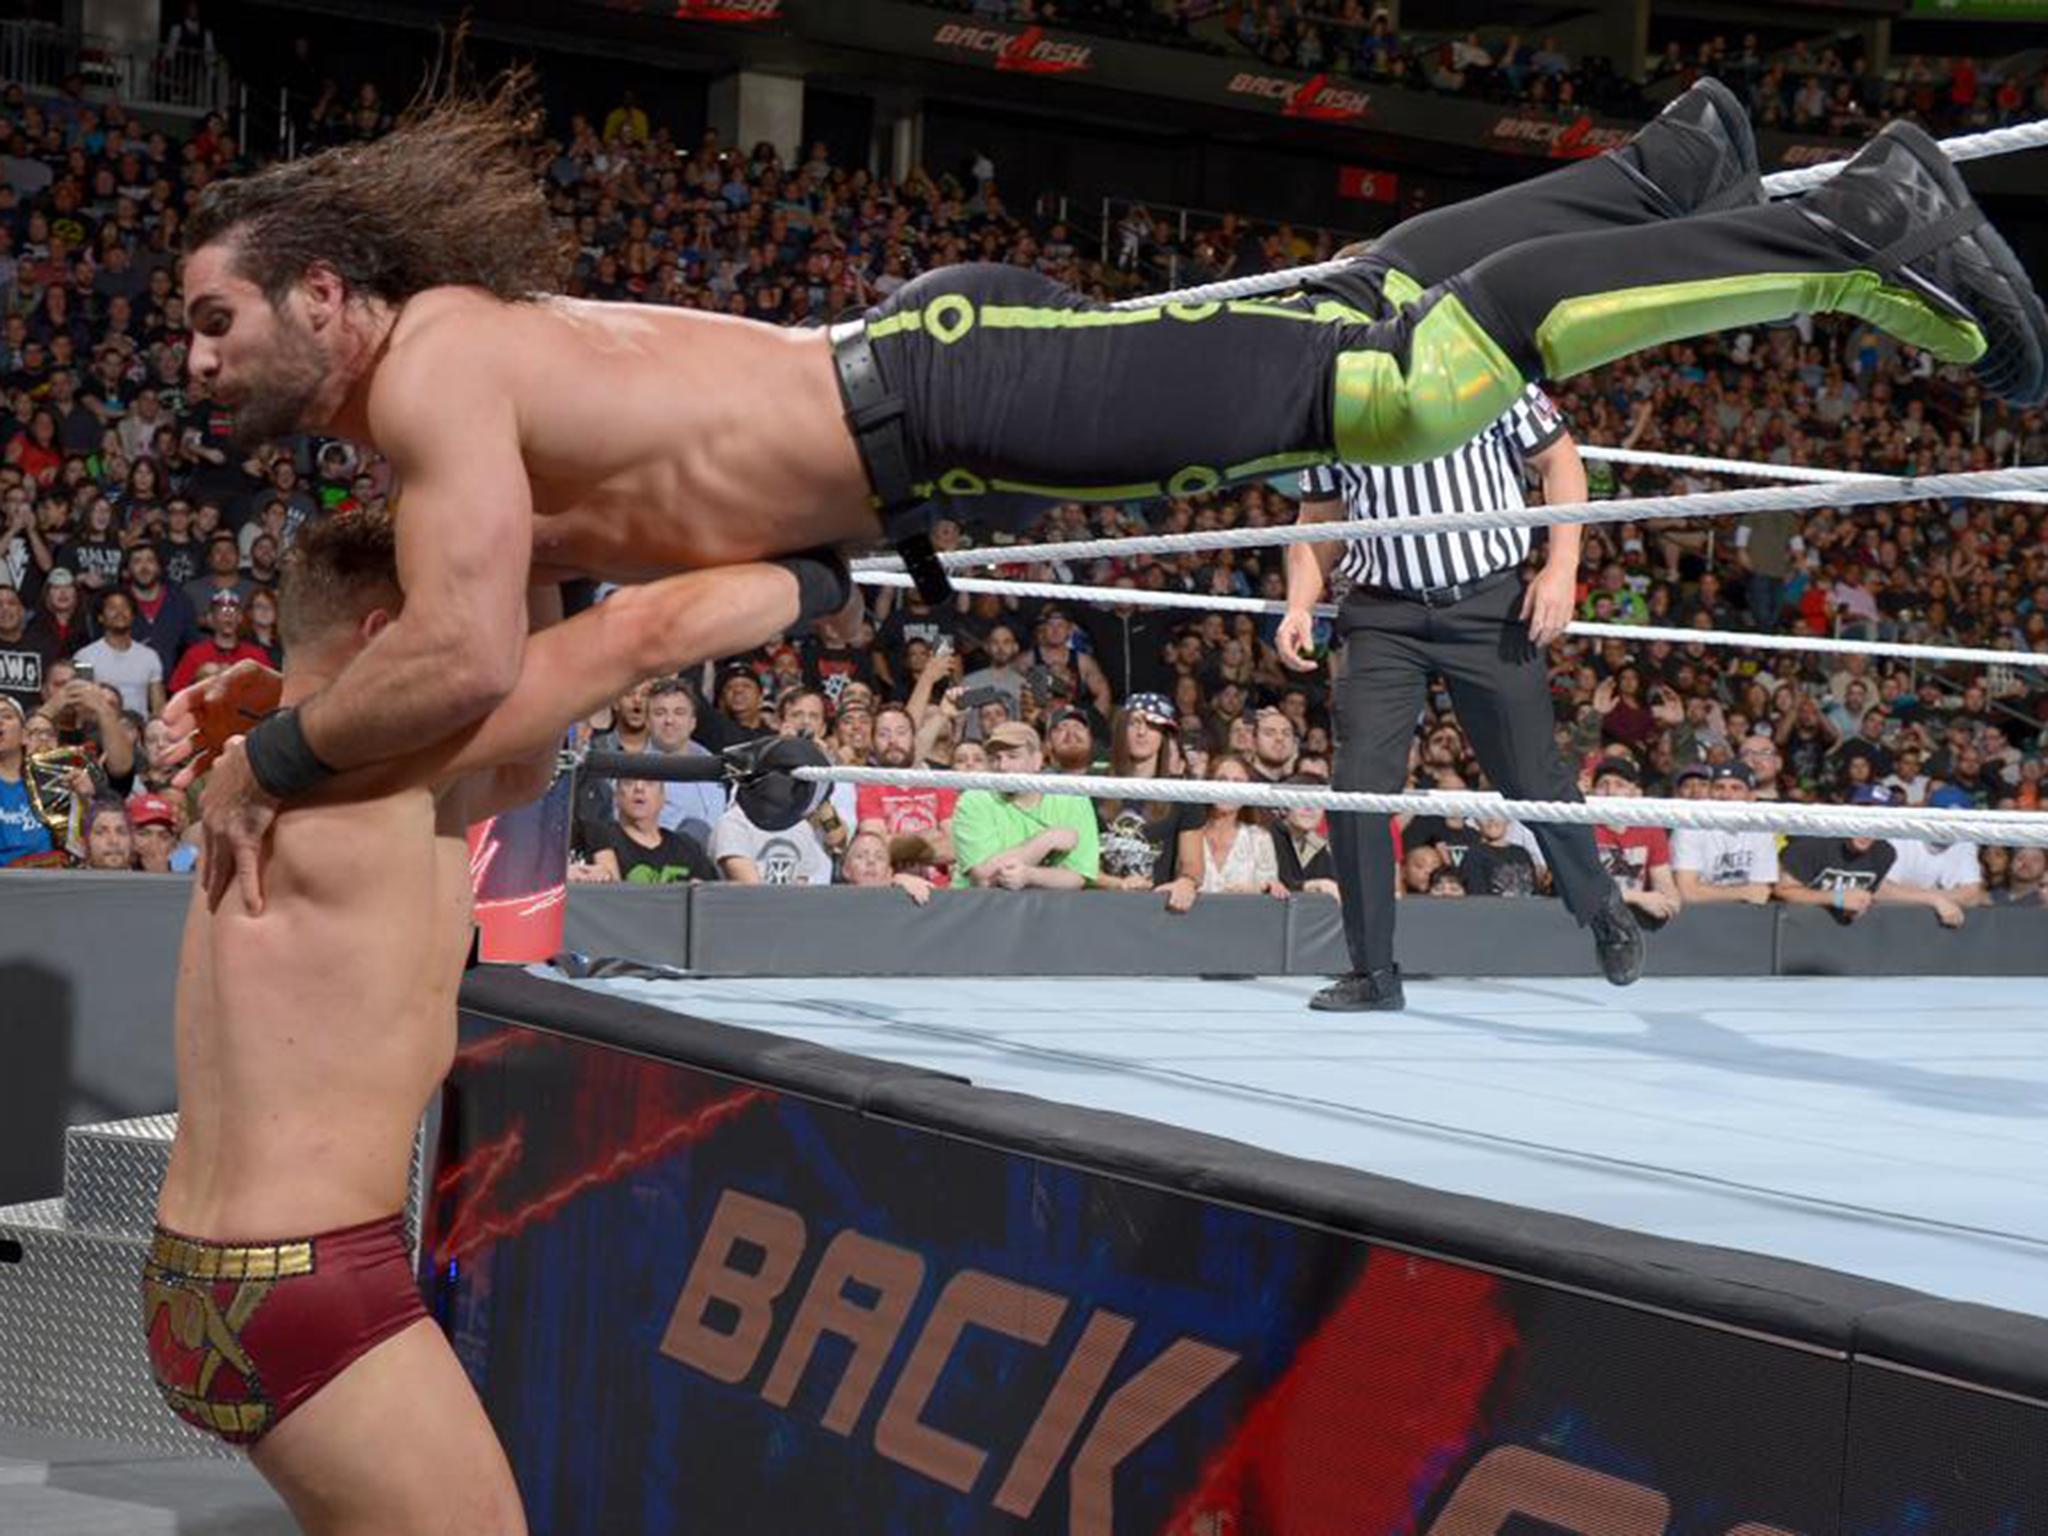 Seth Rollins and The Miz put on the fight of the night by some way